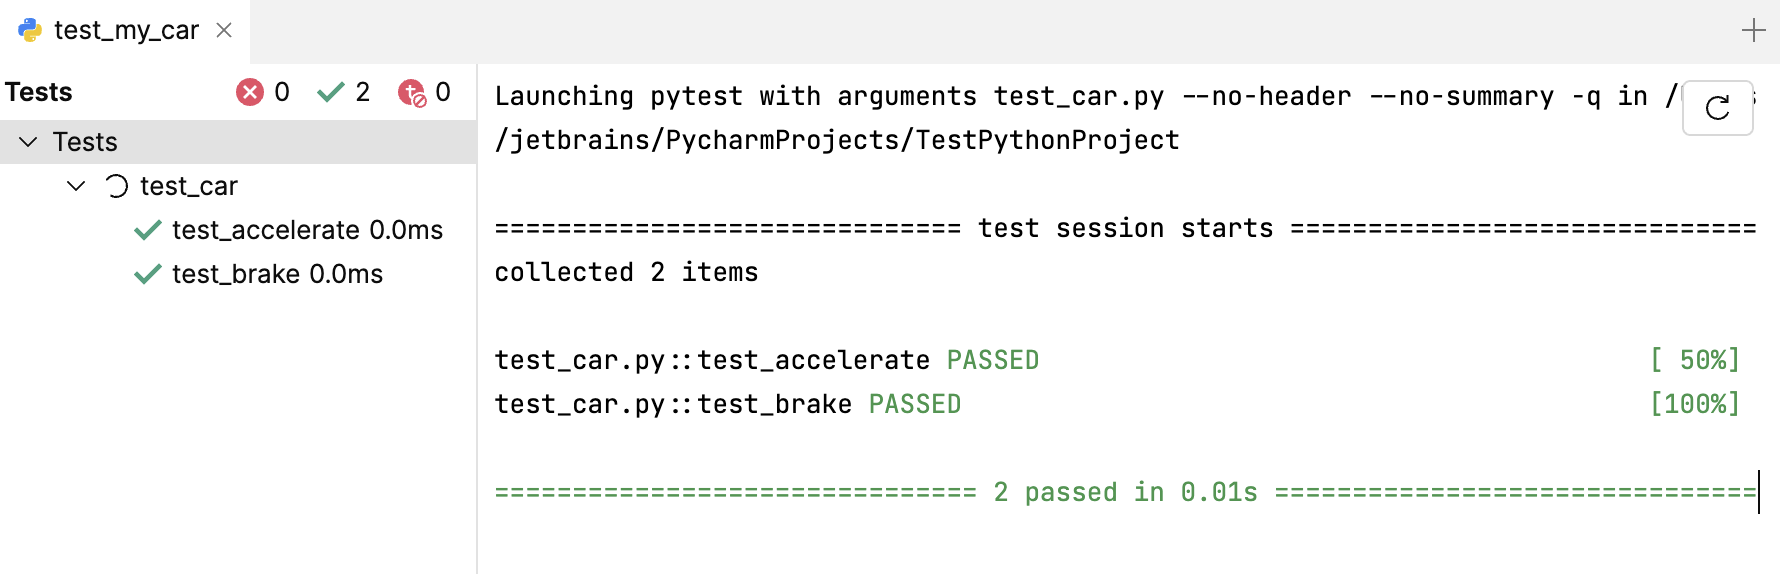 pytest passed all tests